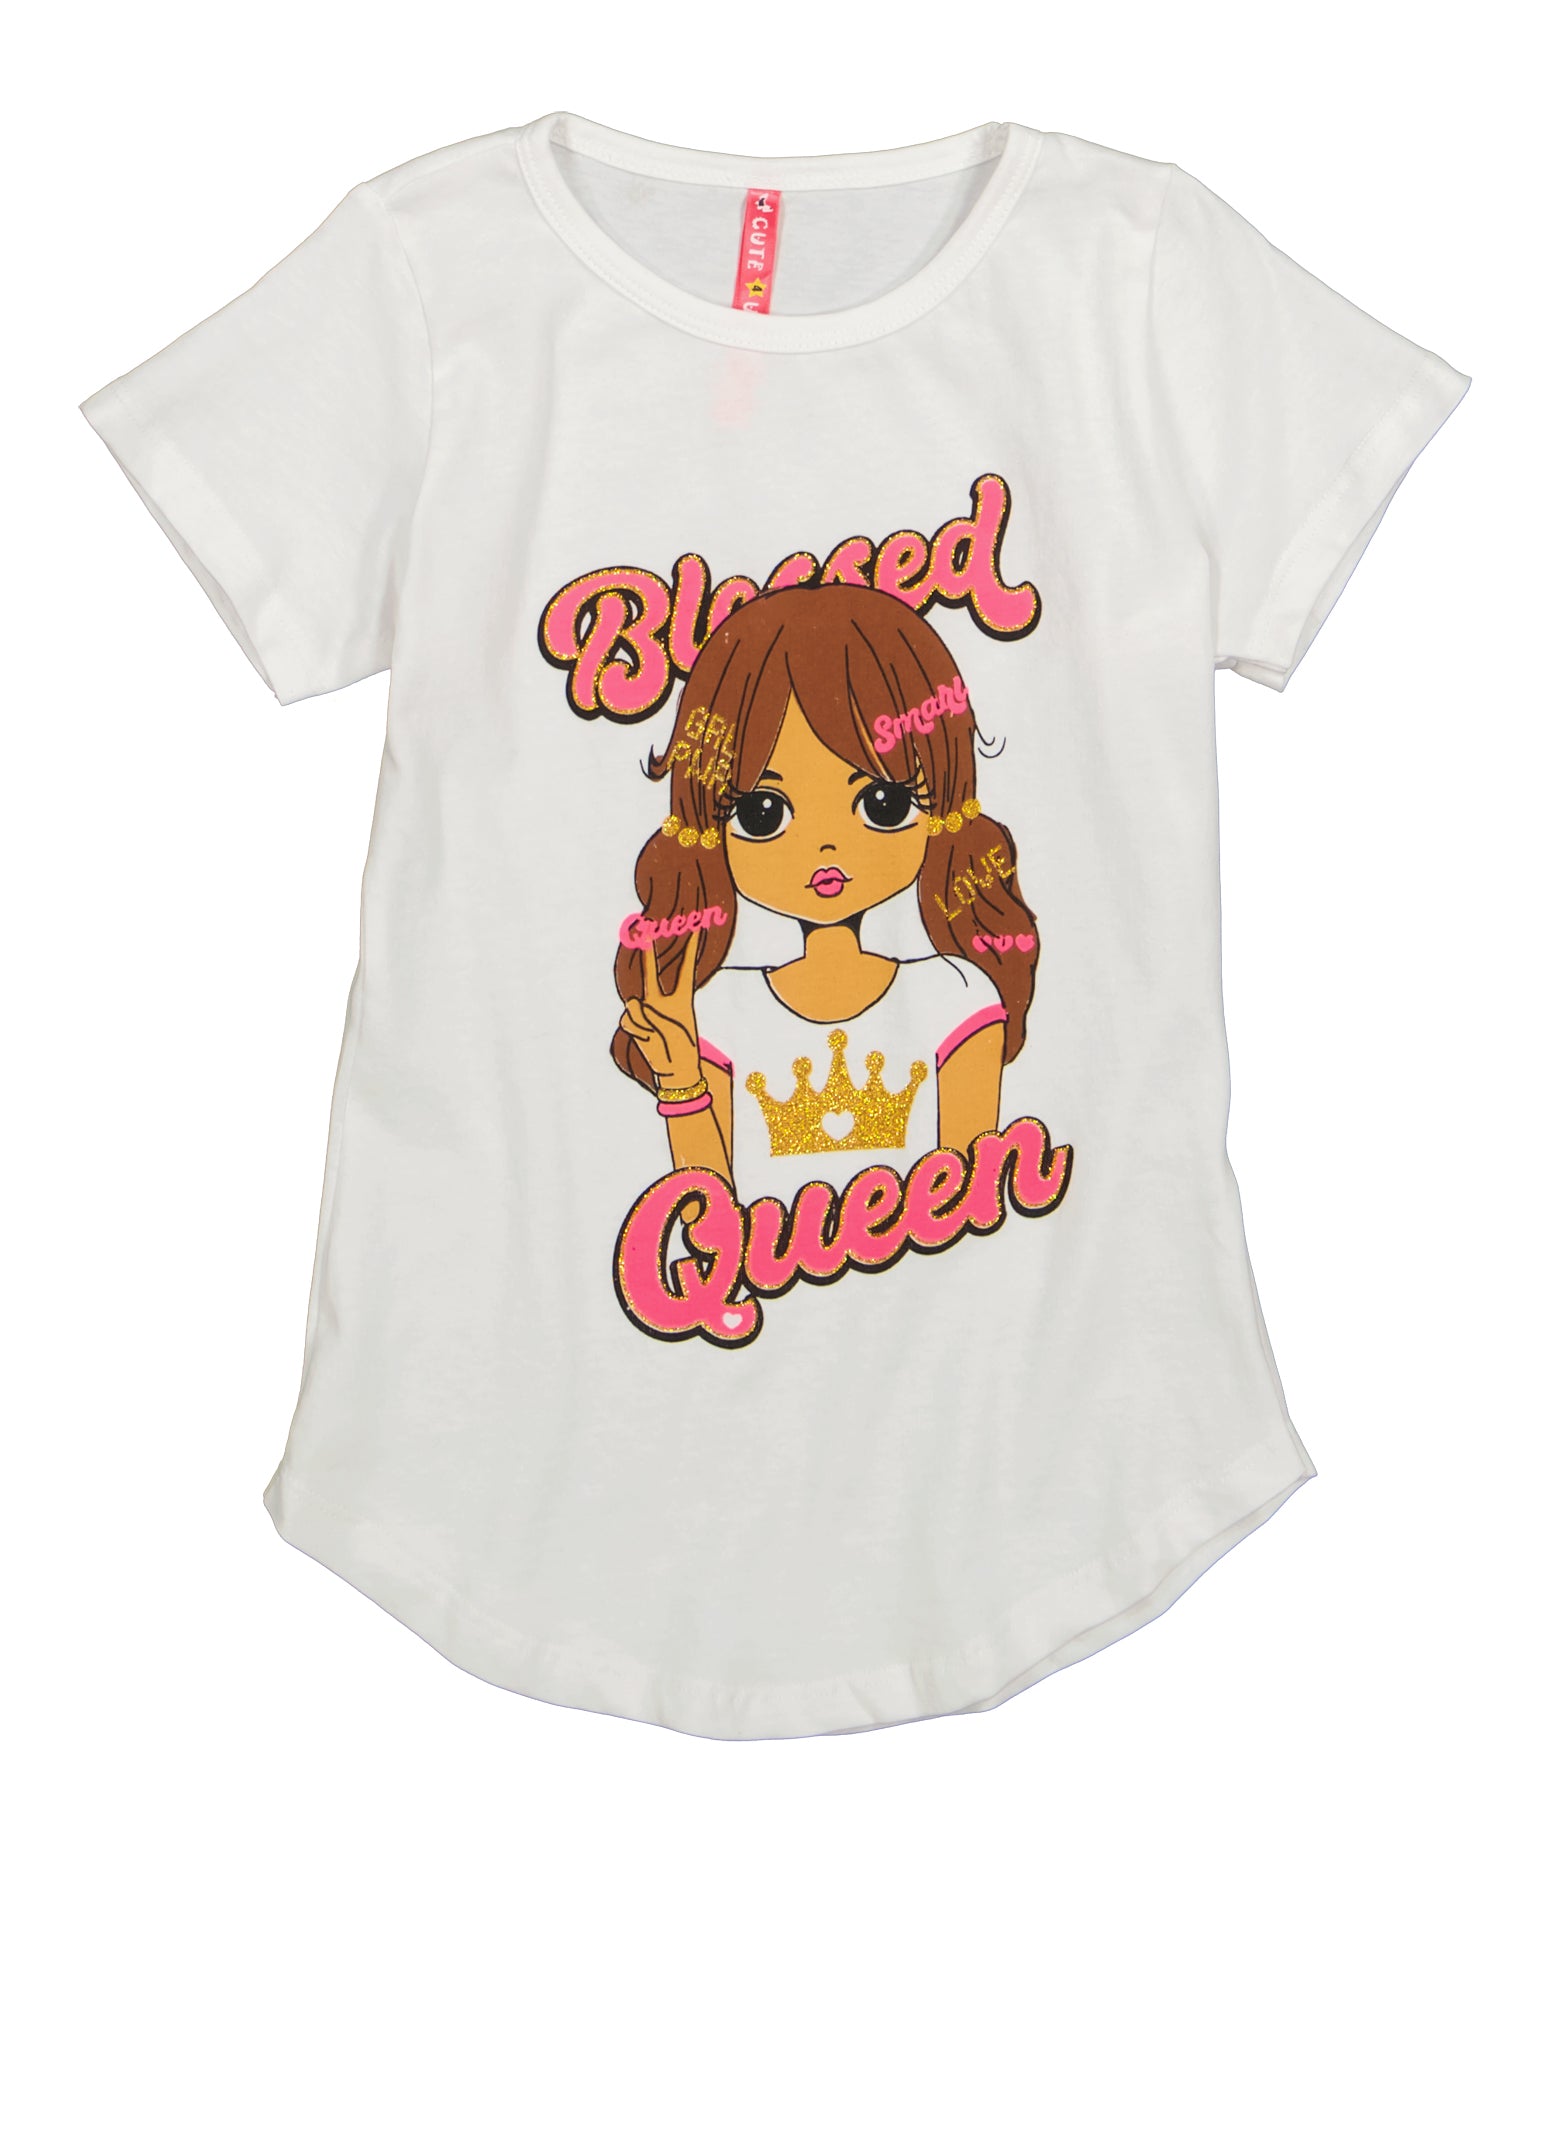 Little Girls Blessed Queen Graphic Tee, White, Size 6X